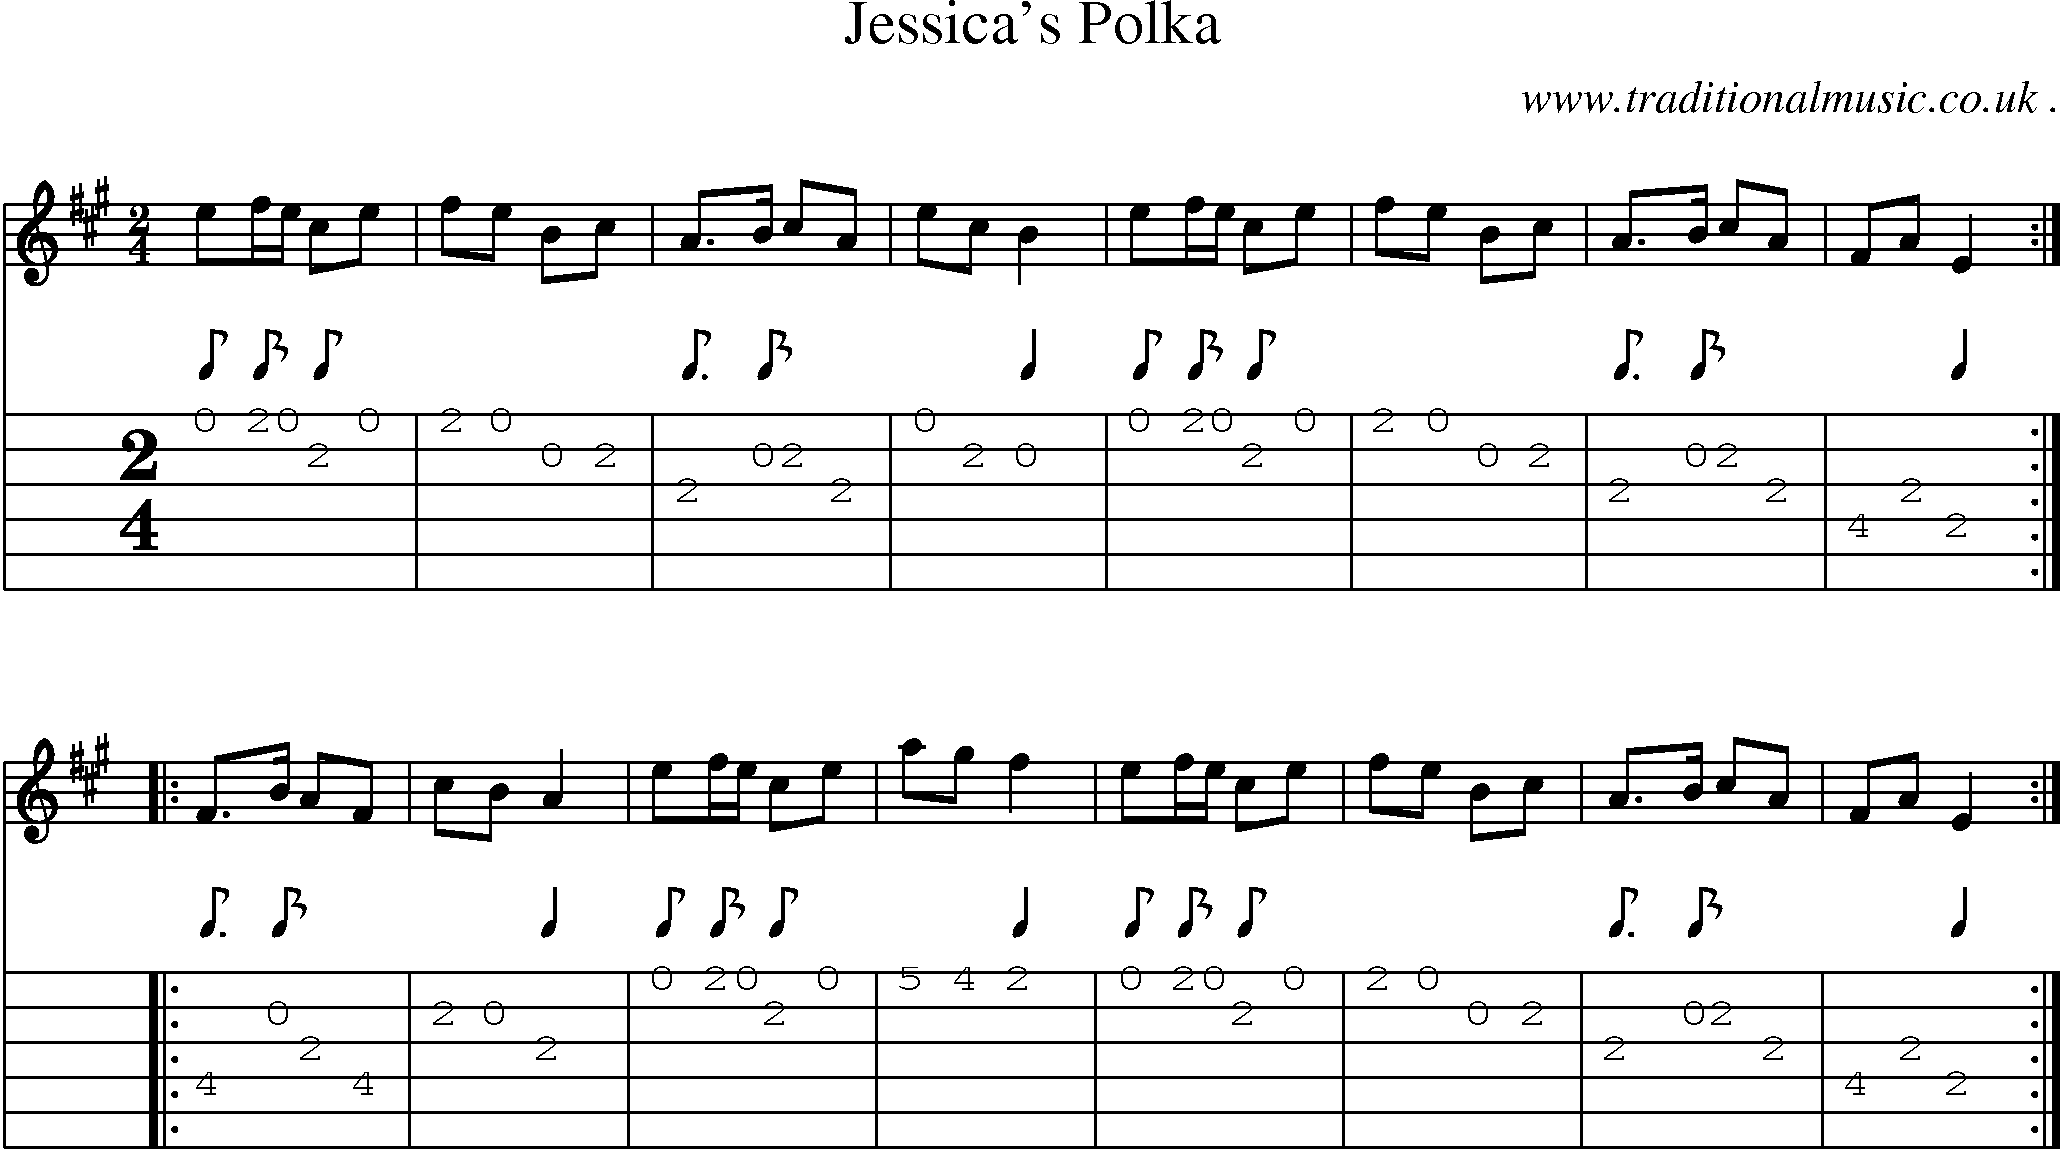 Sheet-Music and Guitar Tabs for Jessicas Polka